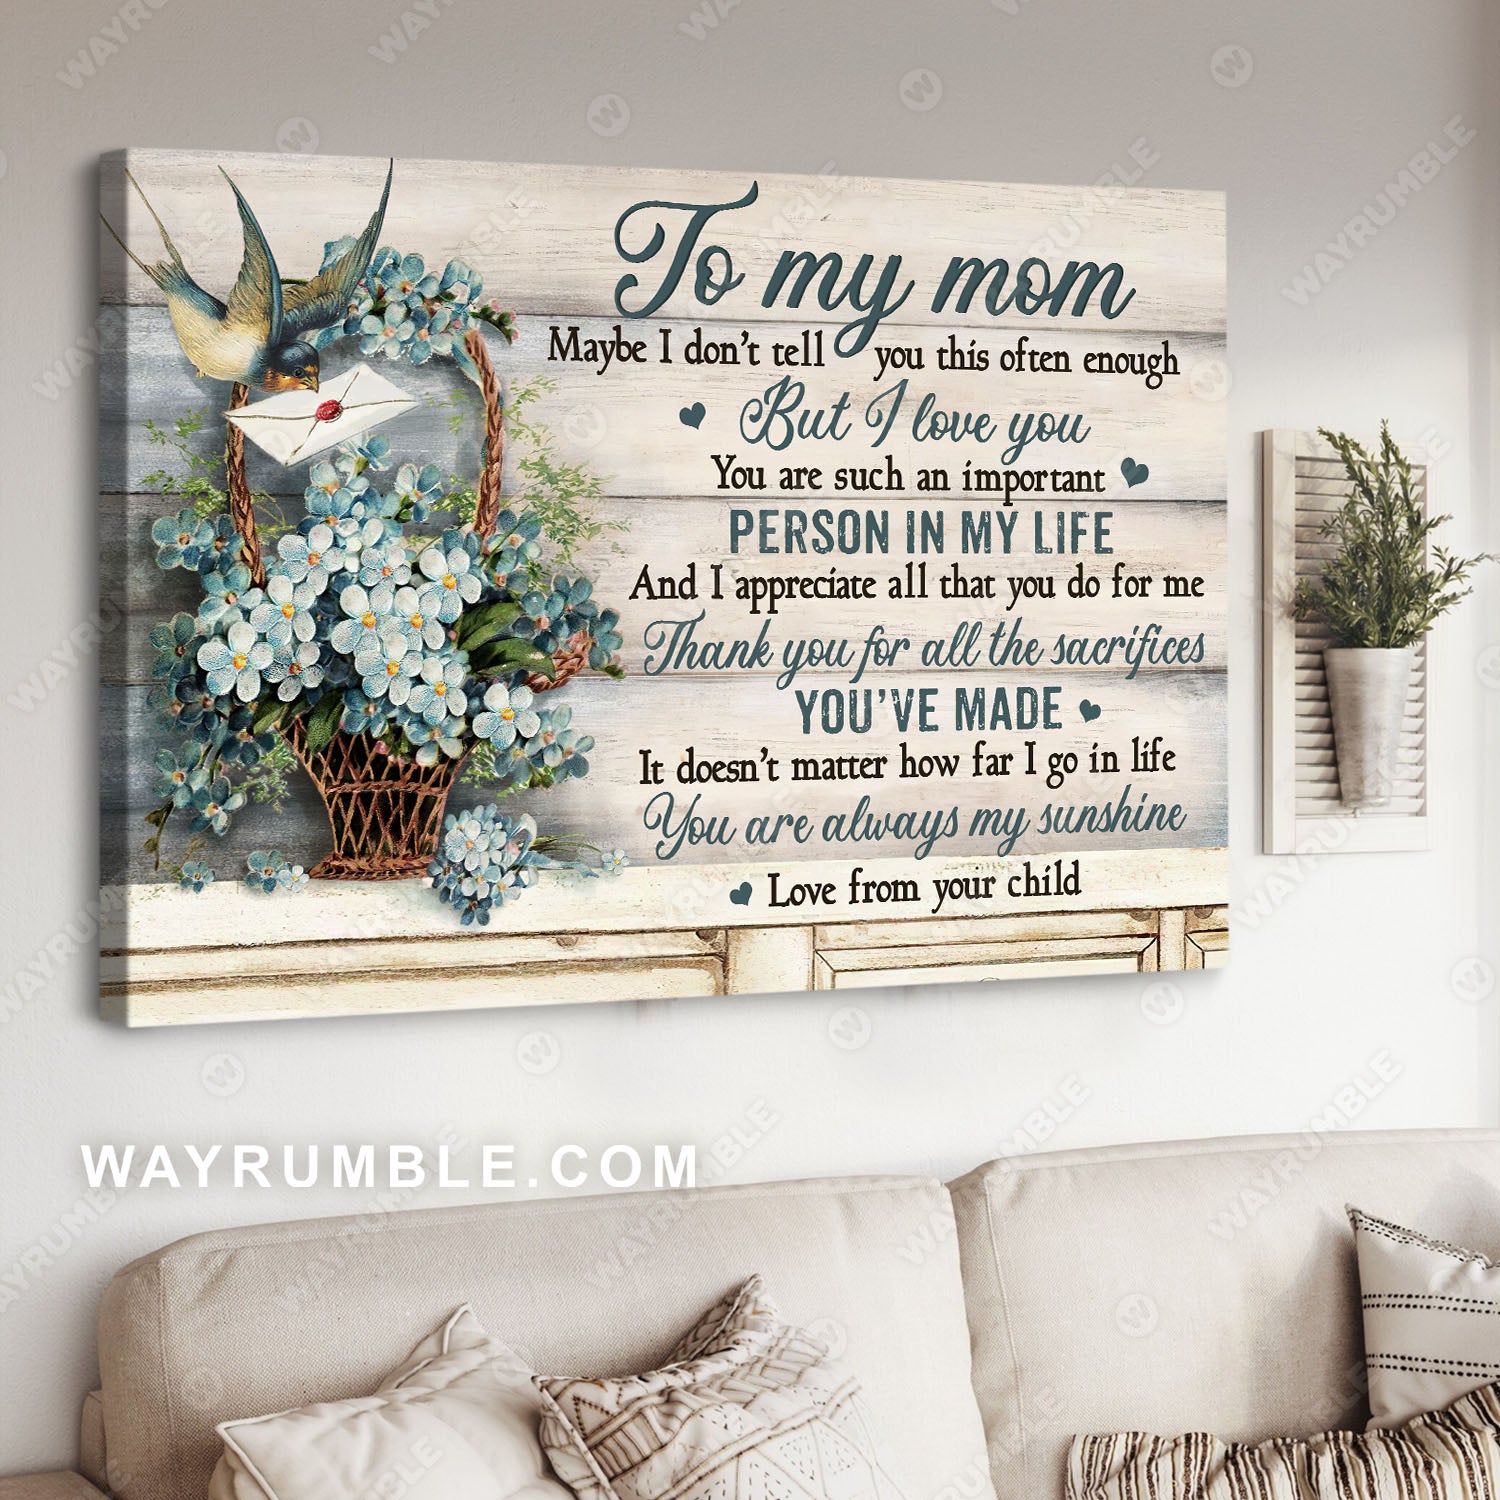 Son to mom, Cherry blossom flowers, White letter, You are always my sunshine - Family Landscape Canvas Prints, Wall Art